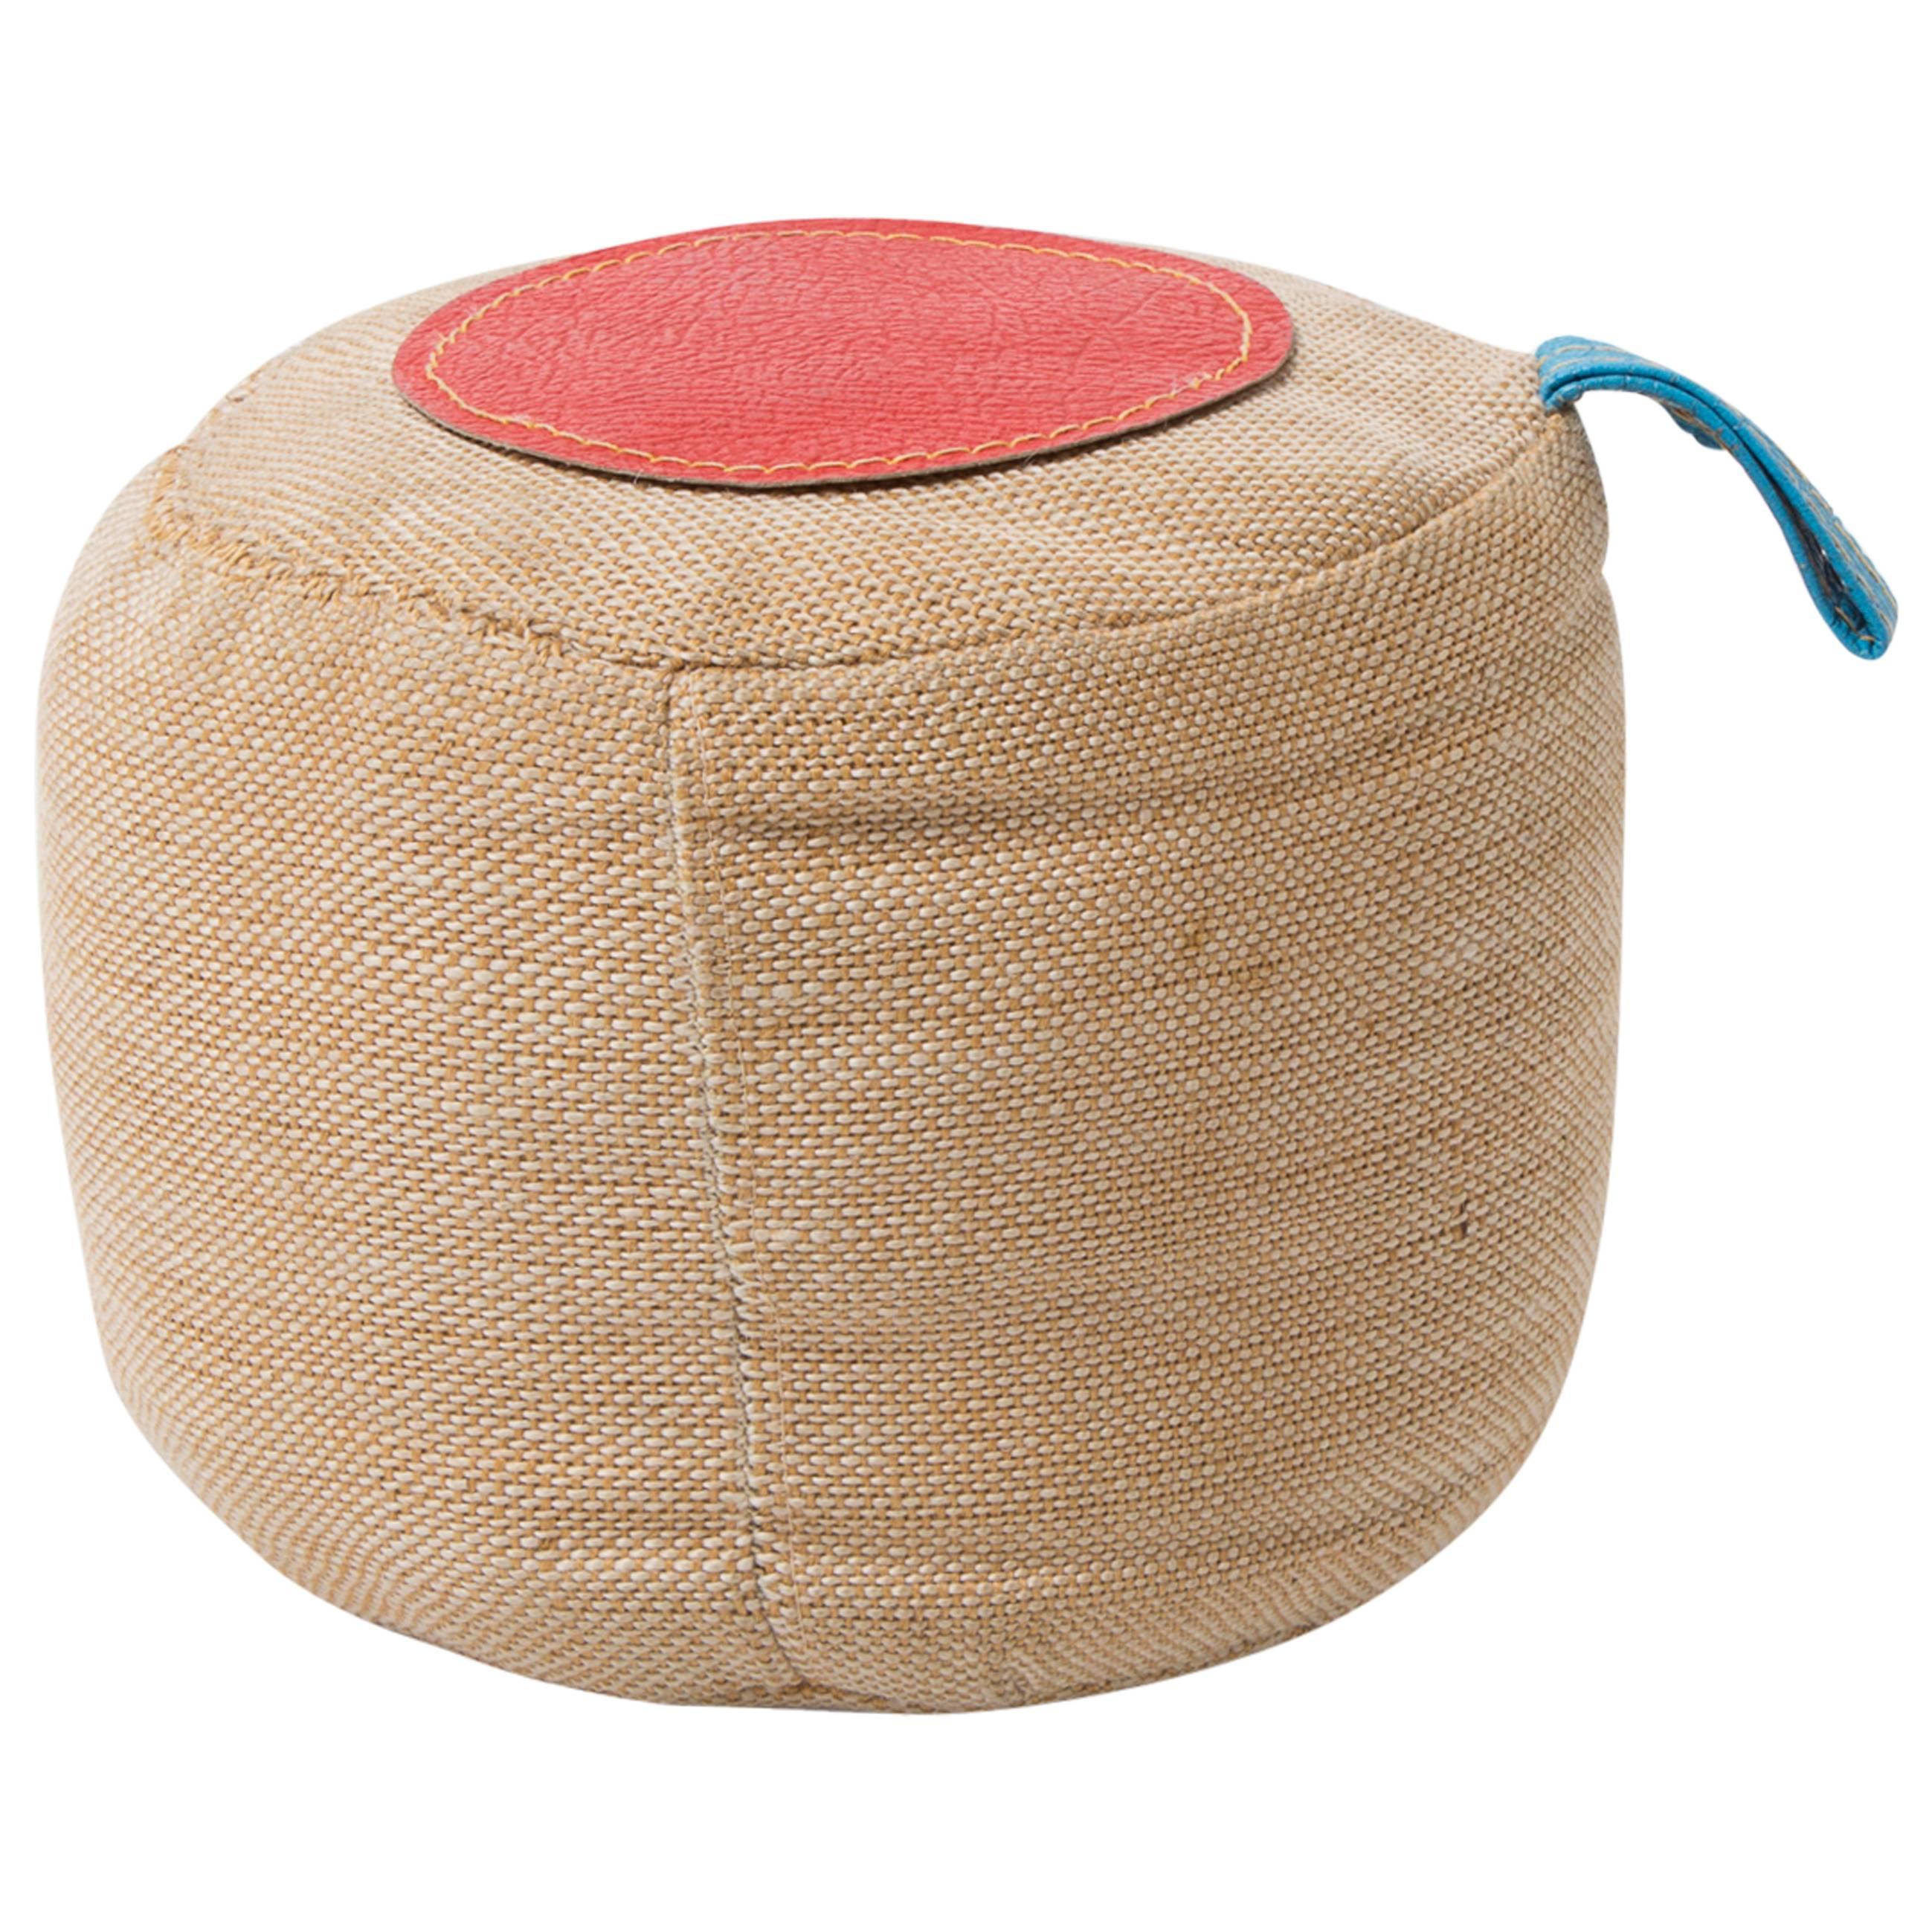 'Therapeutic Toy' Cylindrical Seat Cushion by Renate Müller designed in 1968 For Sale